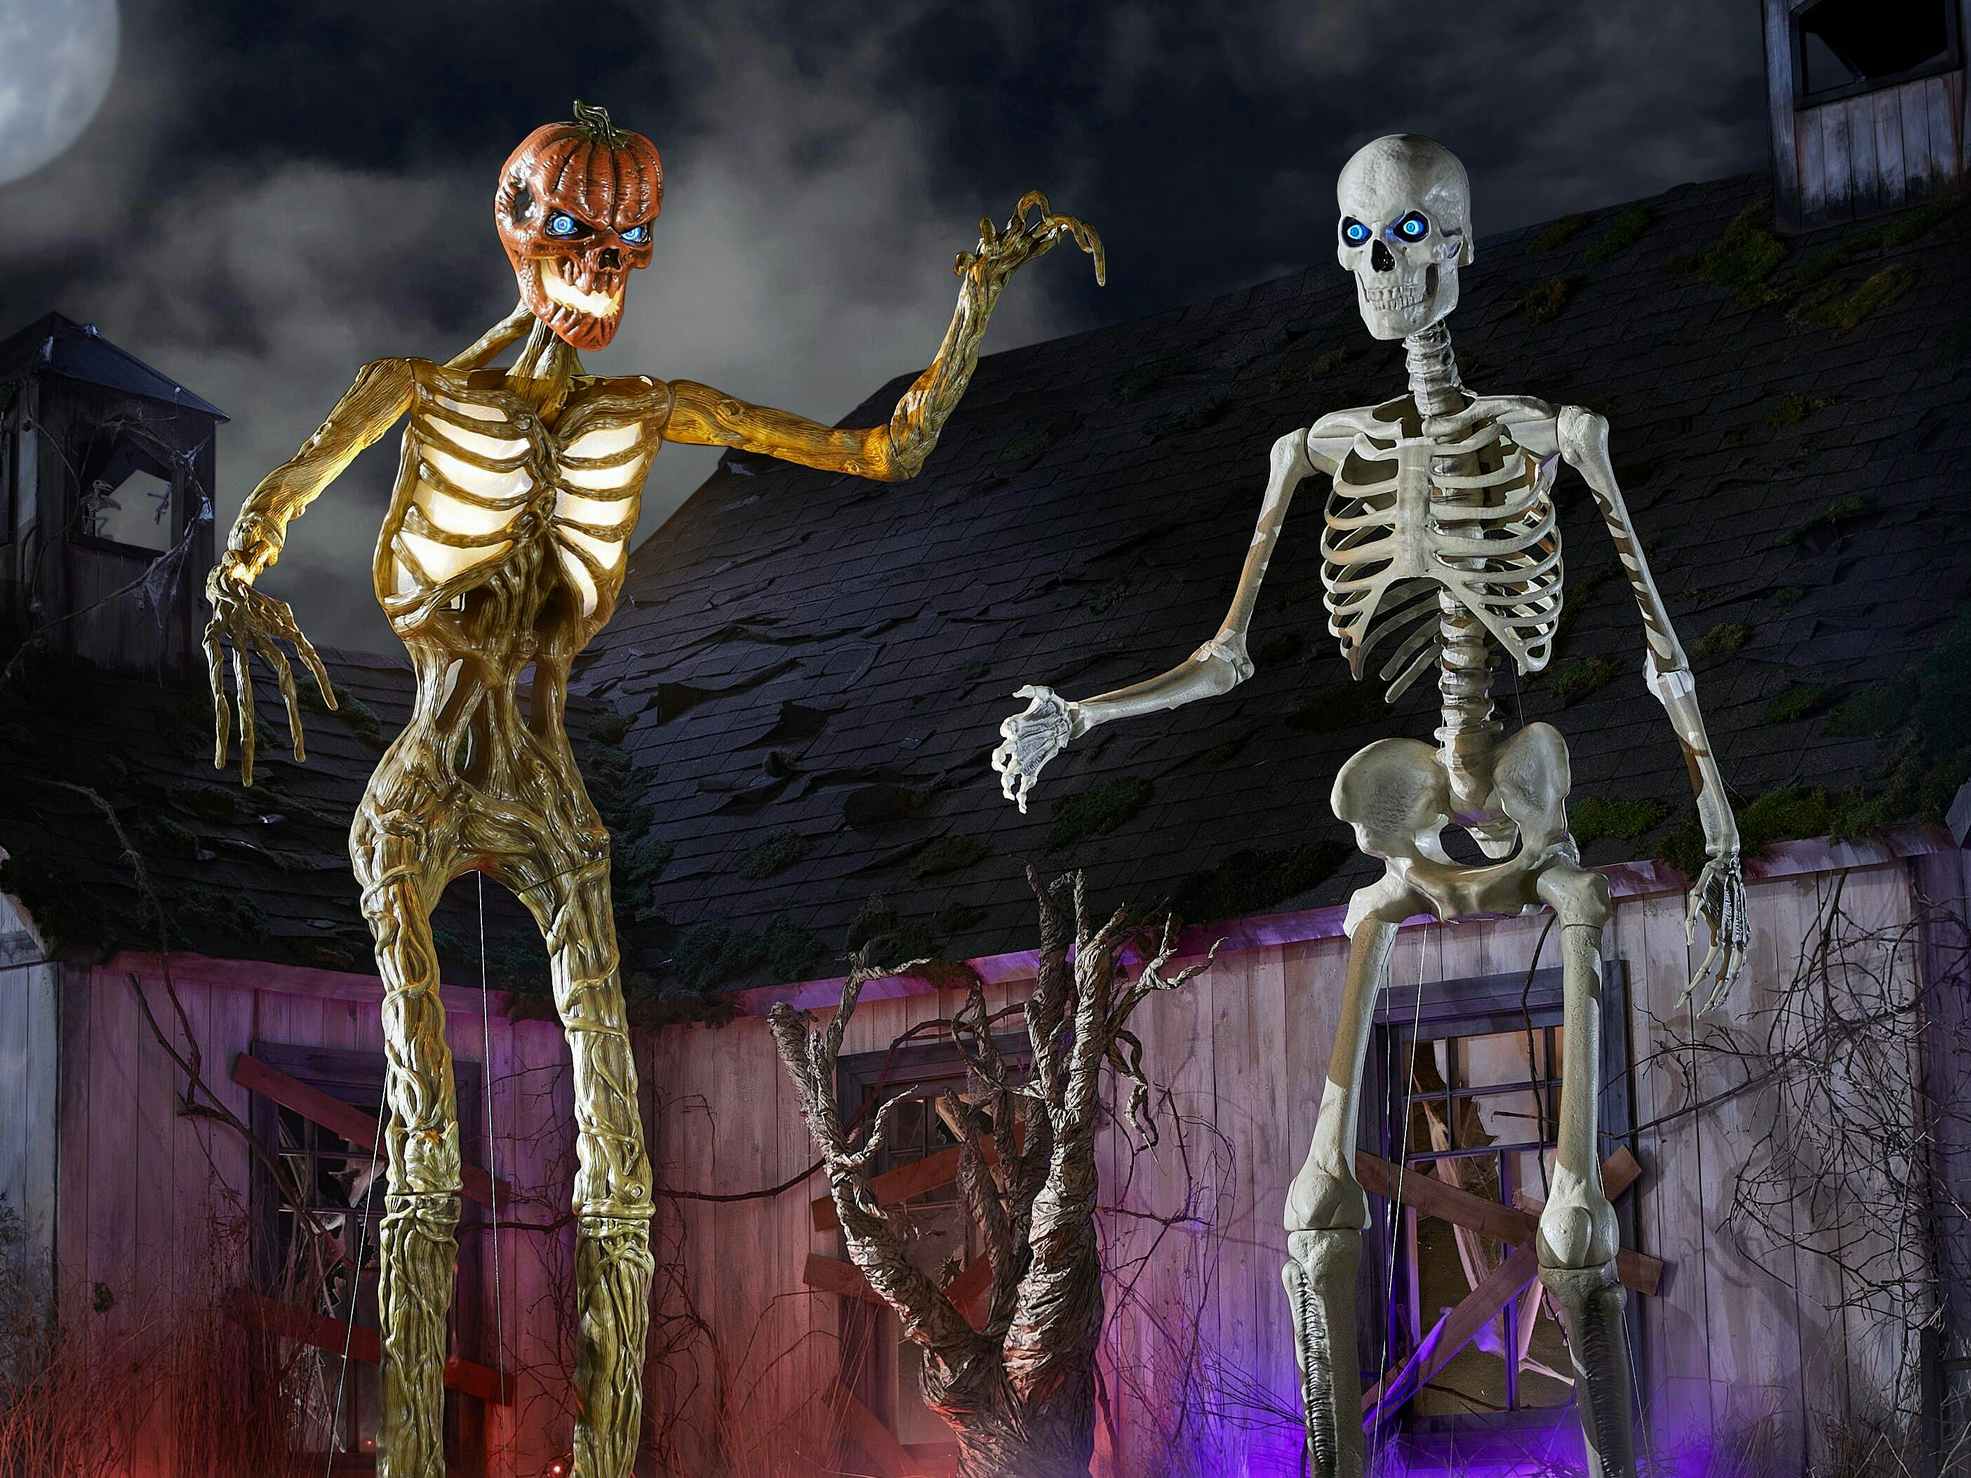 The giant skeleton decorations from Home Depot on a spooky Halloween set